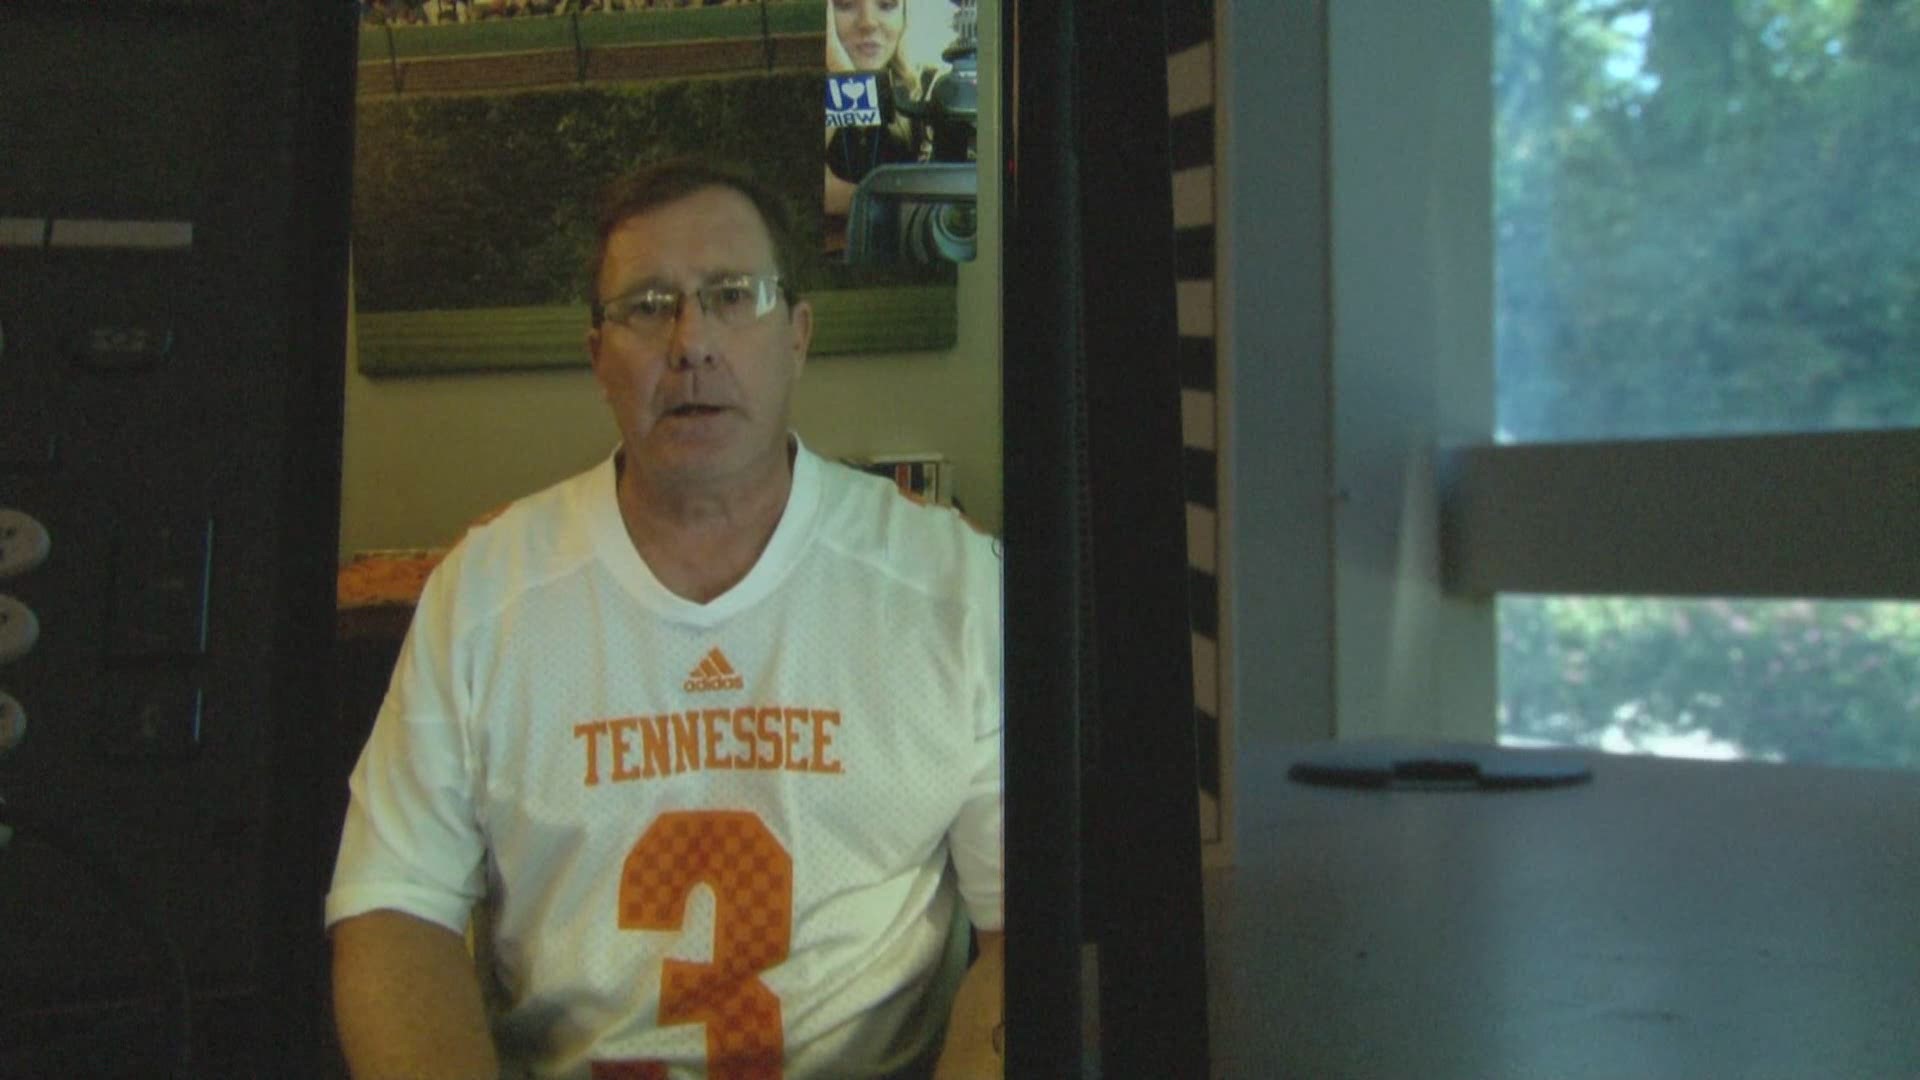 An effort began to send the elementary school student not only an official Vols t-shirt and other gear, but even more, they wanted him to know that his fellow Tennessee fans had his back.